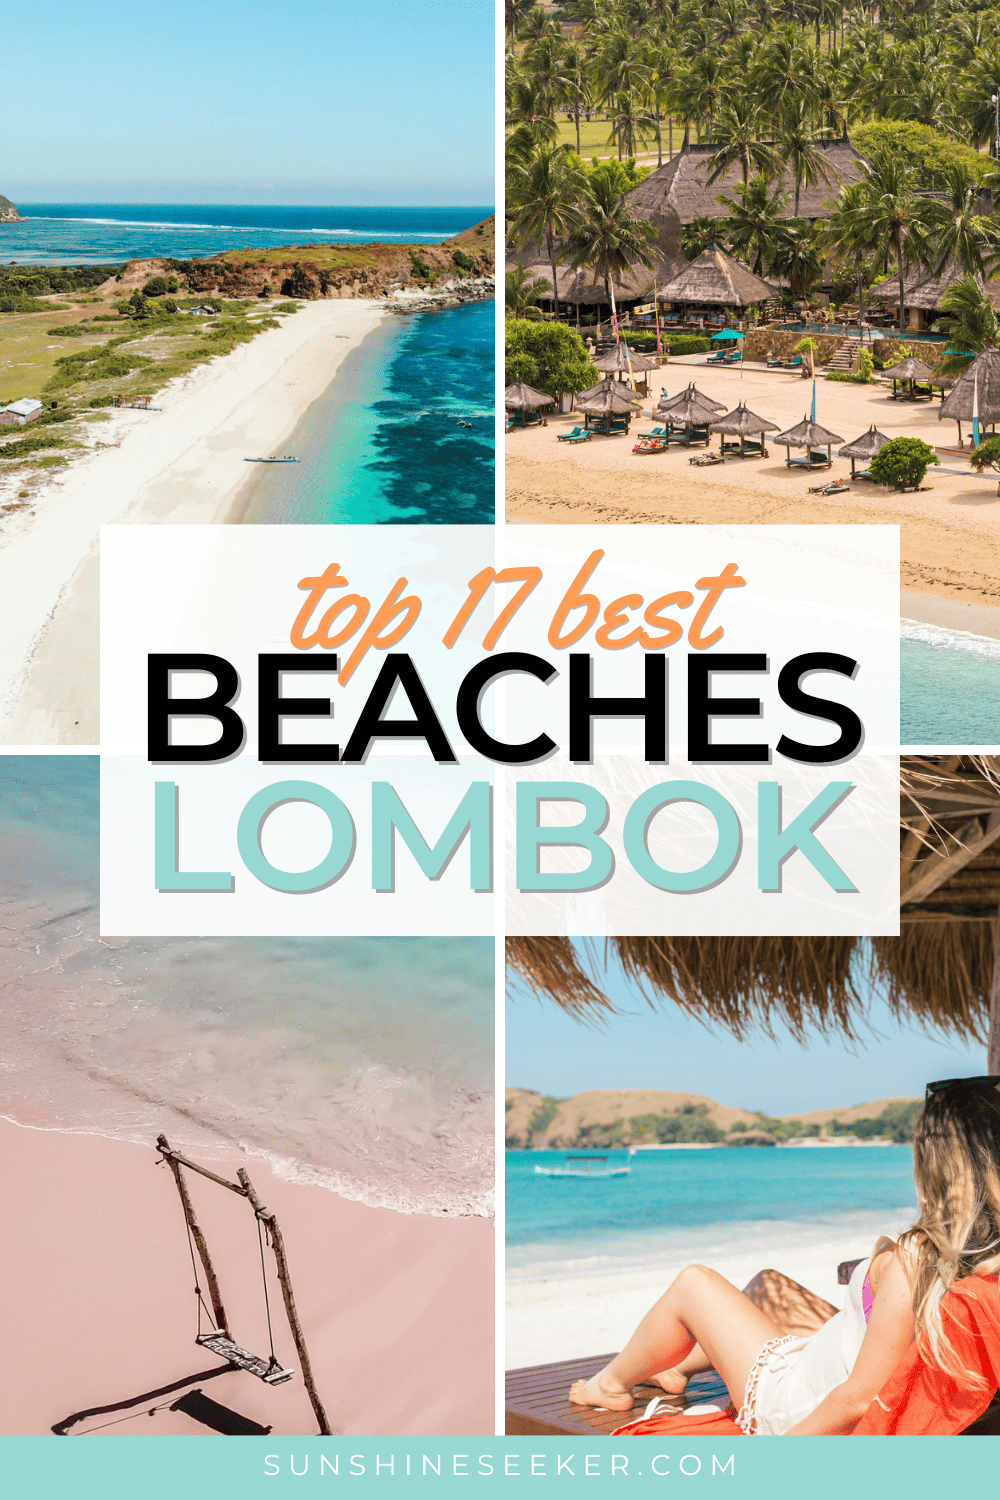 Discover the 17 best beaches in Kuta Lombok. From the white sandy coves of Tanjung Aan to a deserted beach with an abandoned resort in the east. You don't want to miss these gems on your next visit to Lombok, Indonesia.